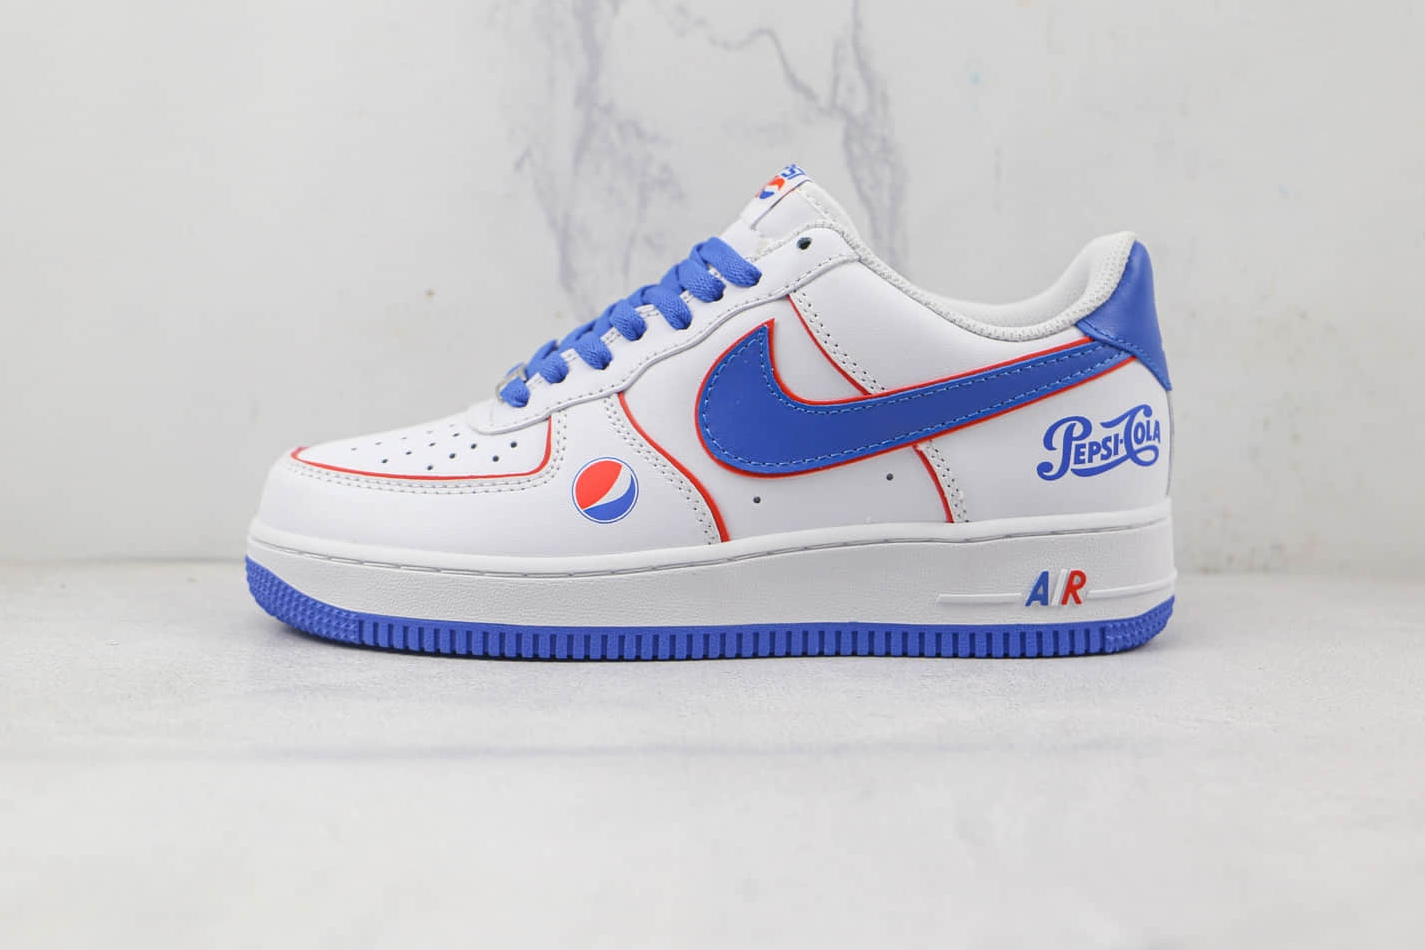 Nike Air Force 1 07 Low Pepsi: Classic Style in White, Dark Blue & Red